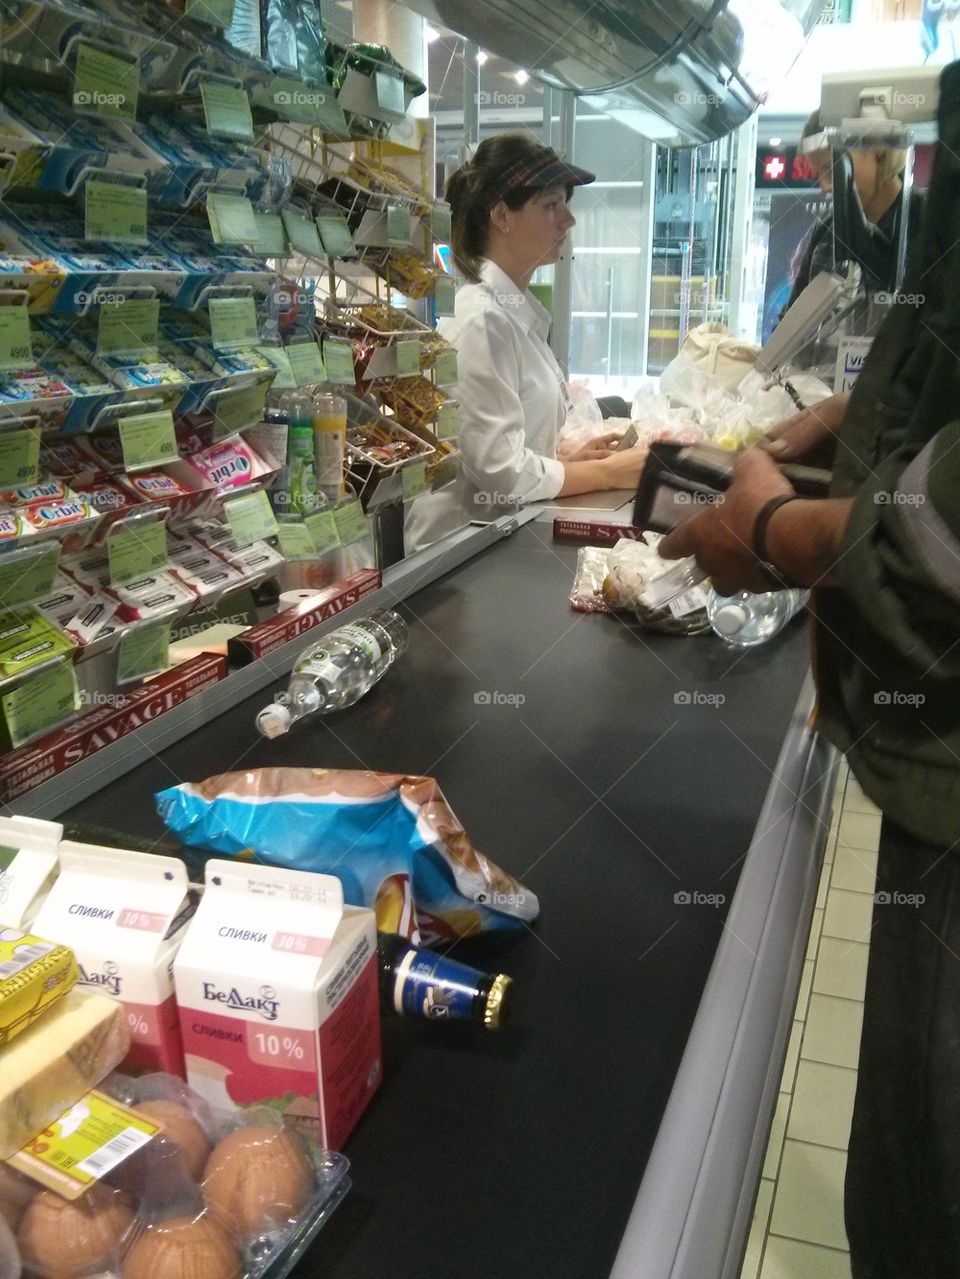 The cashier at the store. Showcase, commodity, price, buyers. Trade center. Seller.